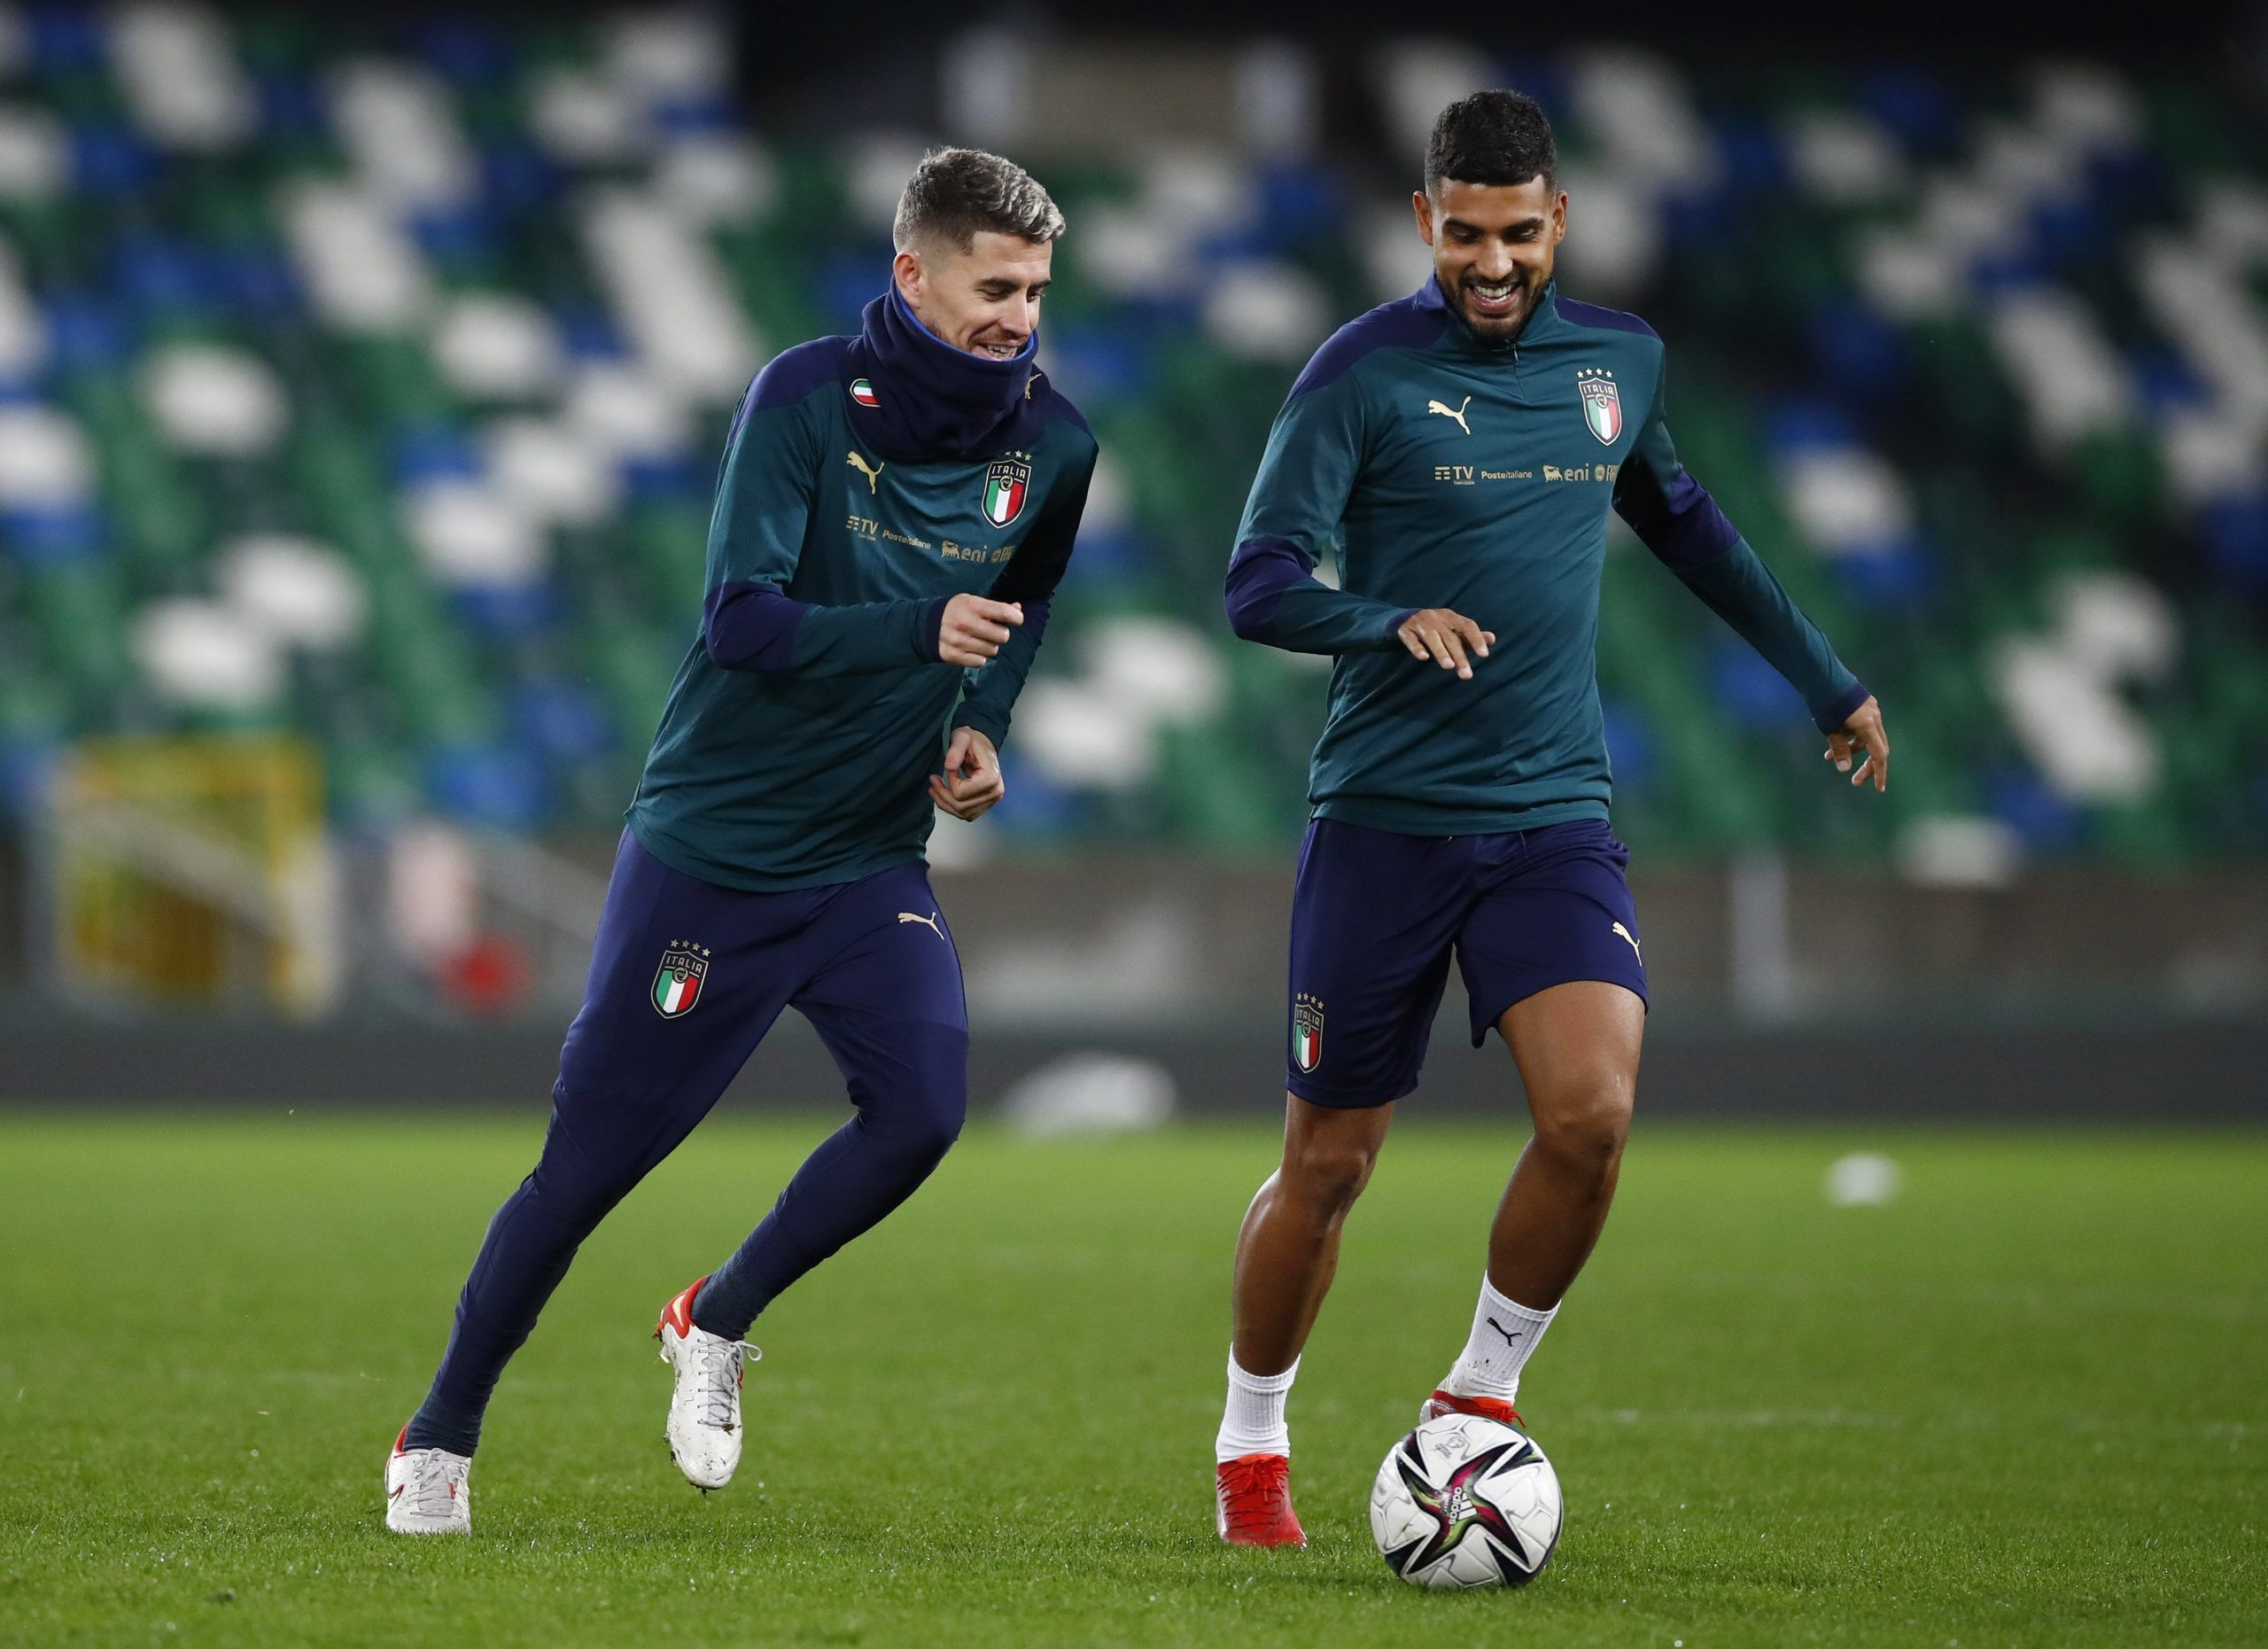 West Ham United: Emerson Palmieri drops out of Italy squad -West Ham News